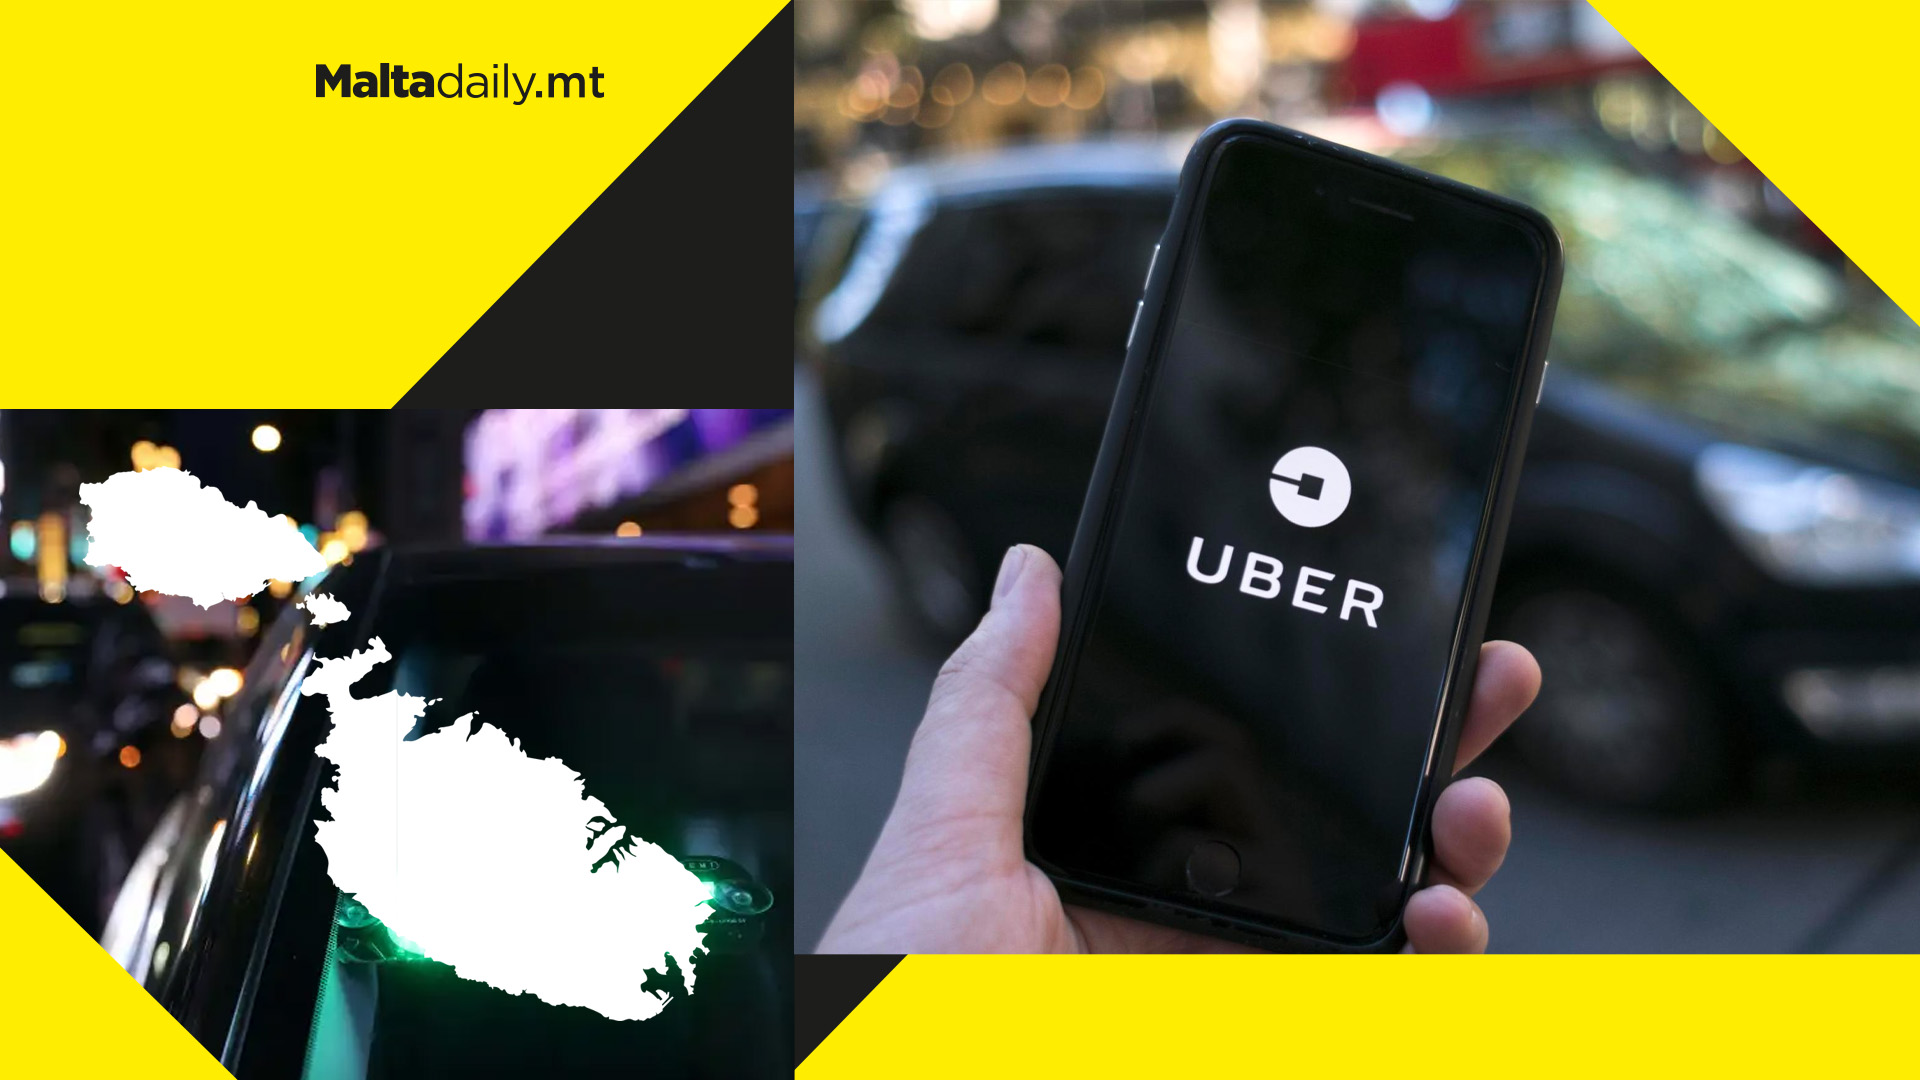 Uber planning Malta launch within weeks; attempting to obtain license